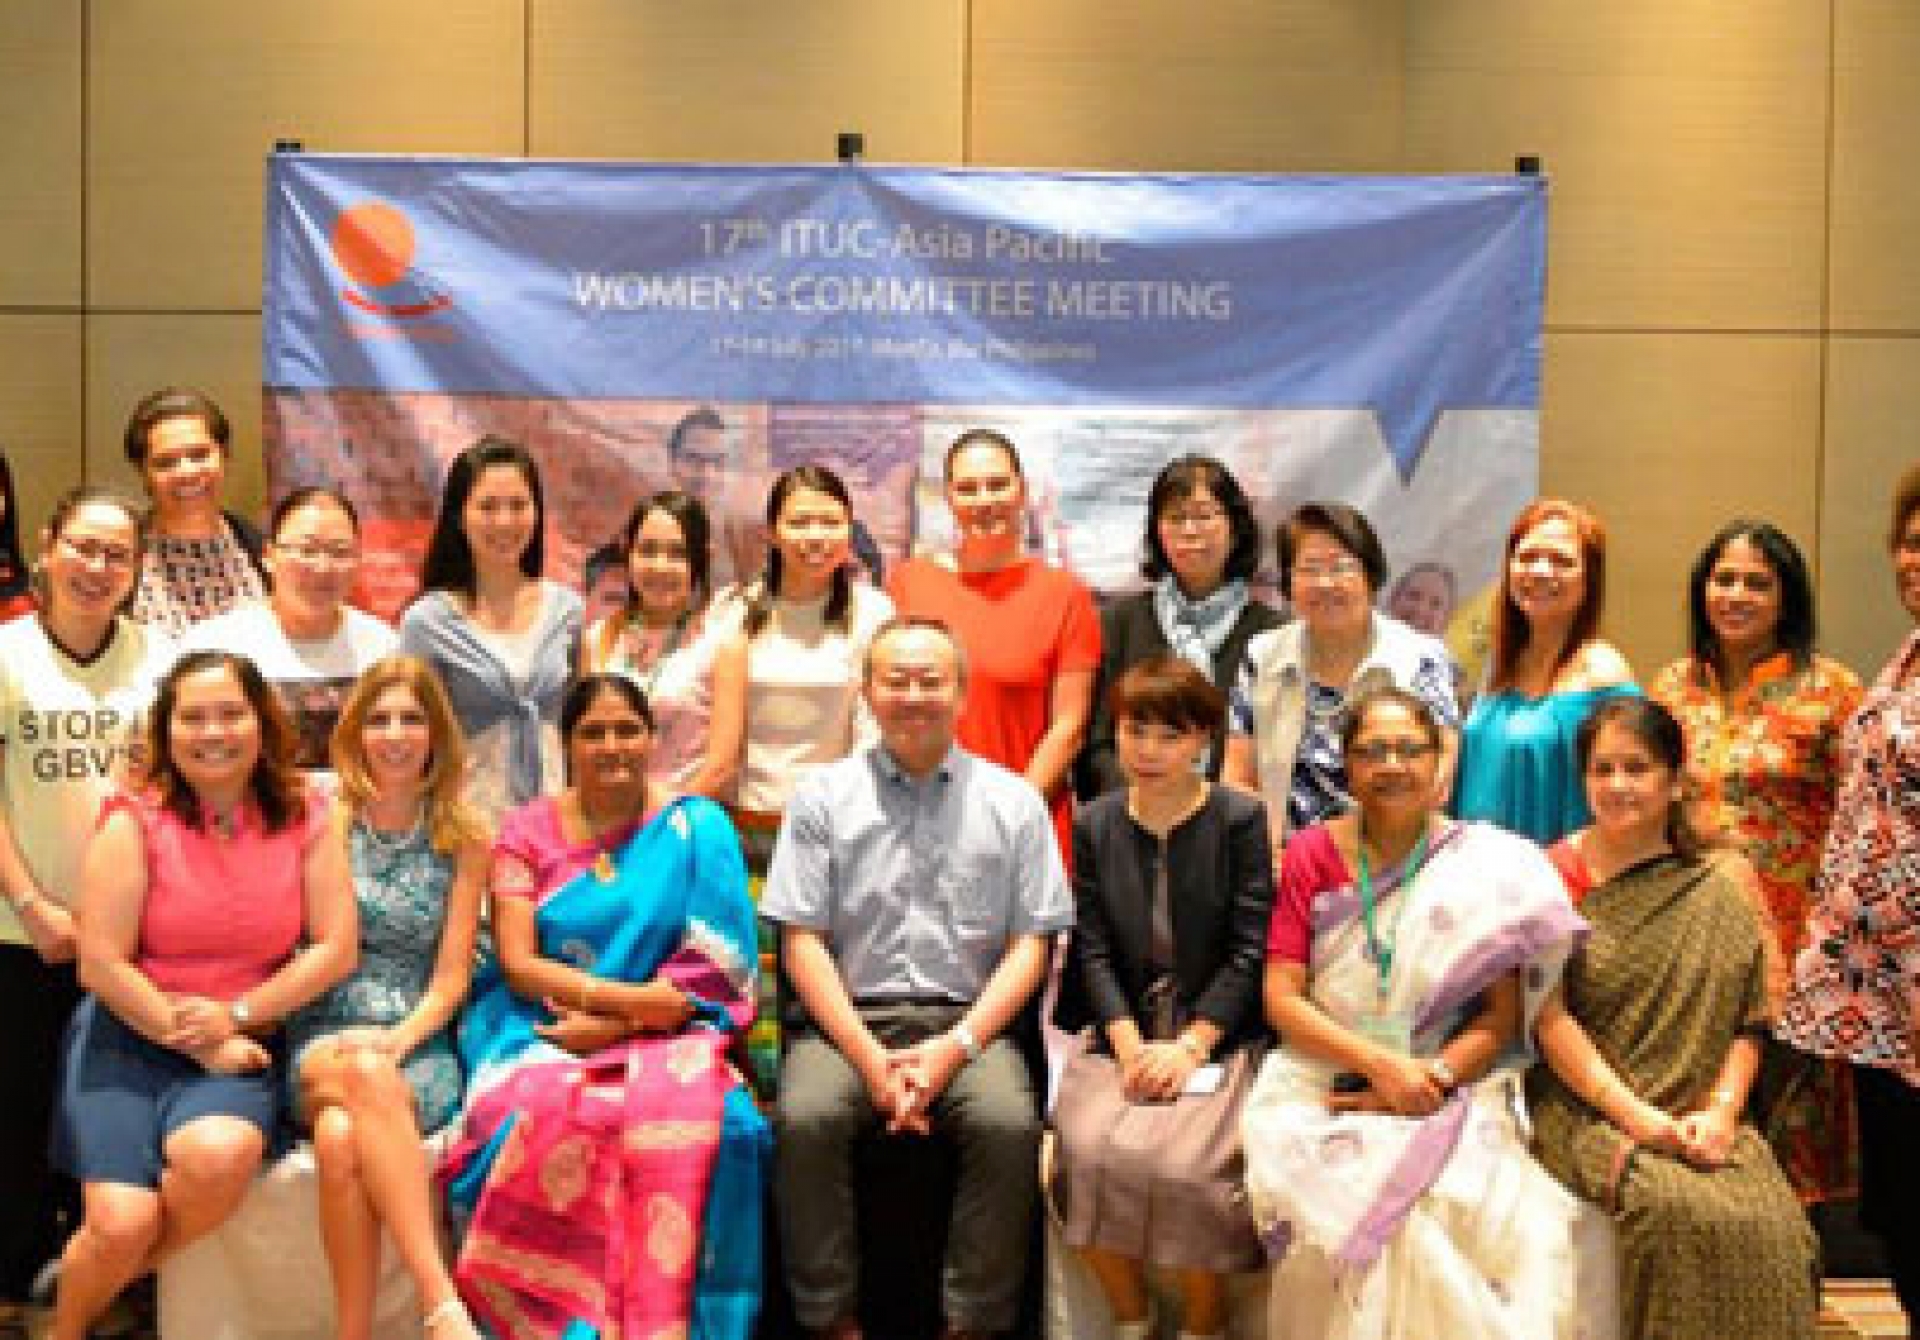 ITUC - AP Regional Preparatory Meeting for the ILO/ ILC Discussion on Violence and Harassment Against Women and Men in the World of Work, and the 17th ITUC – AP Women’s Committee Meeting